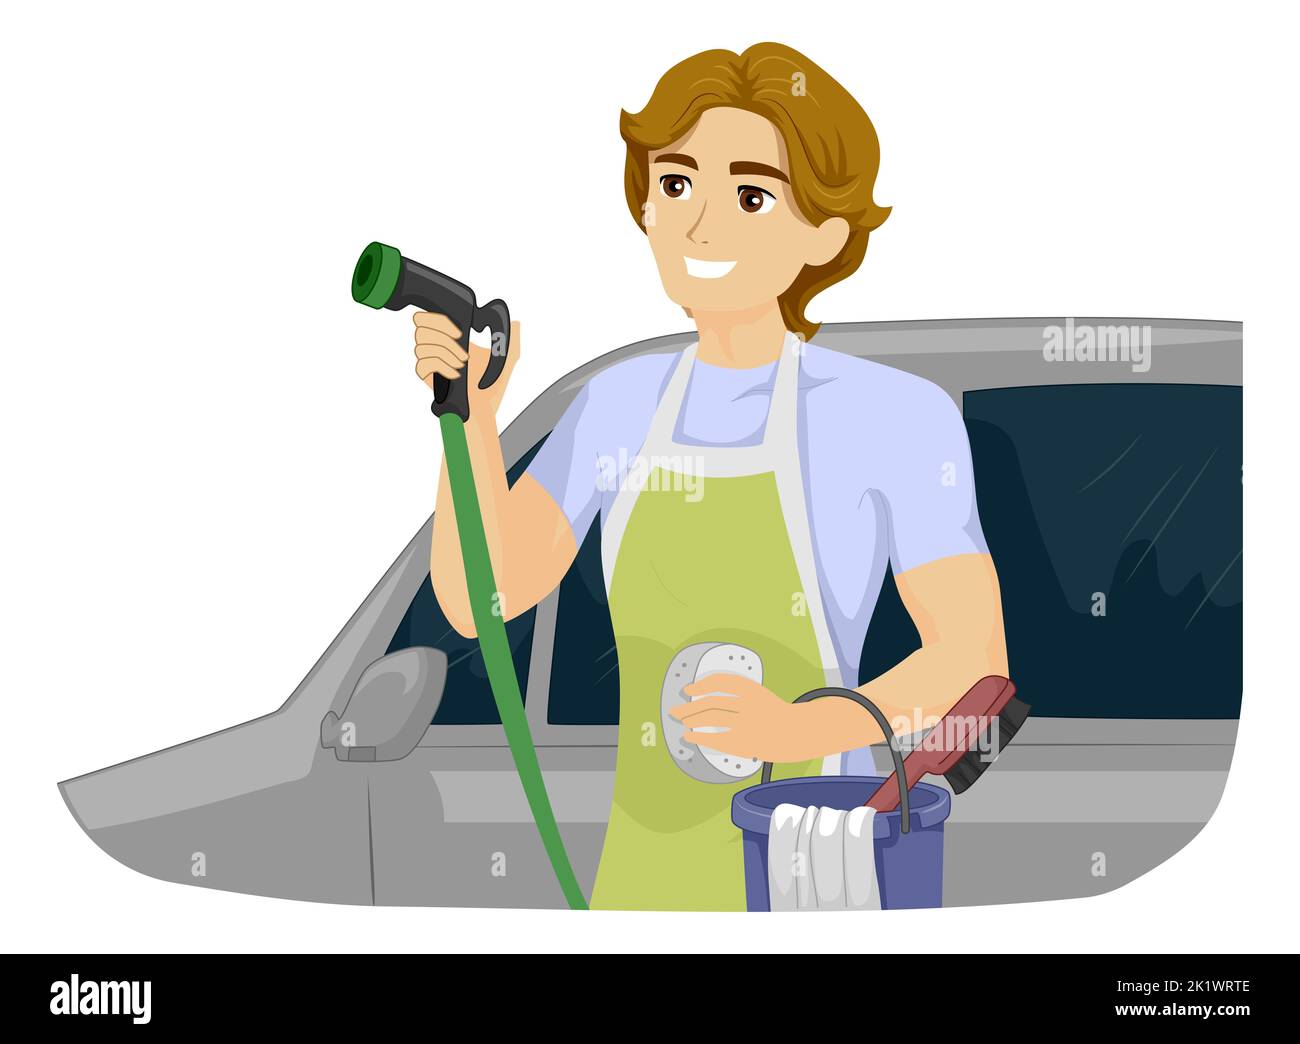 Illustration of Teen Guy Wearing Apron, Carrying Pail with Cleaning Materials and Holding Water Hose for Washing Car Stock Photo